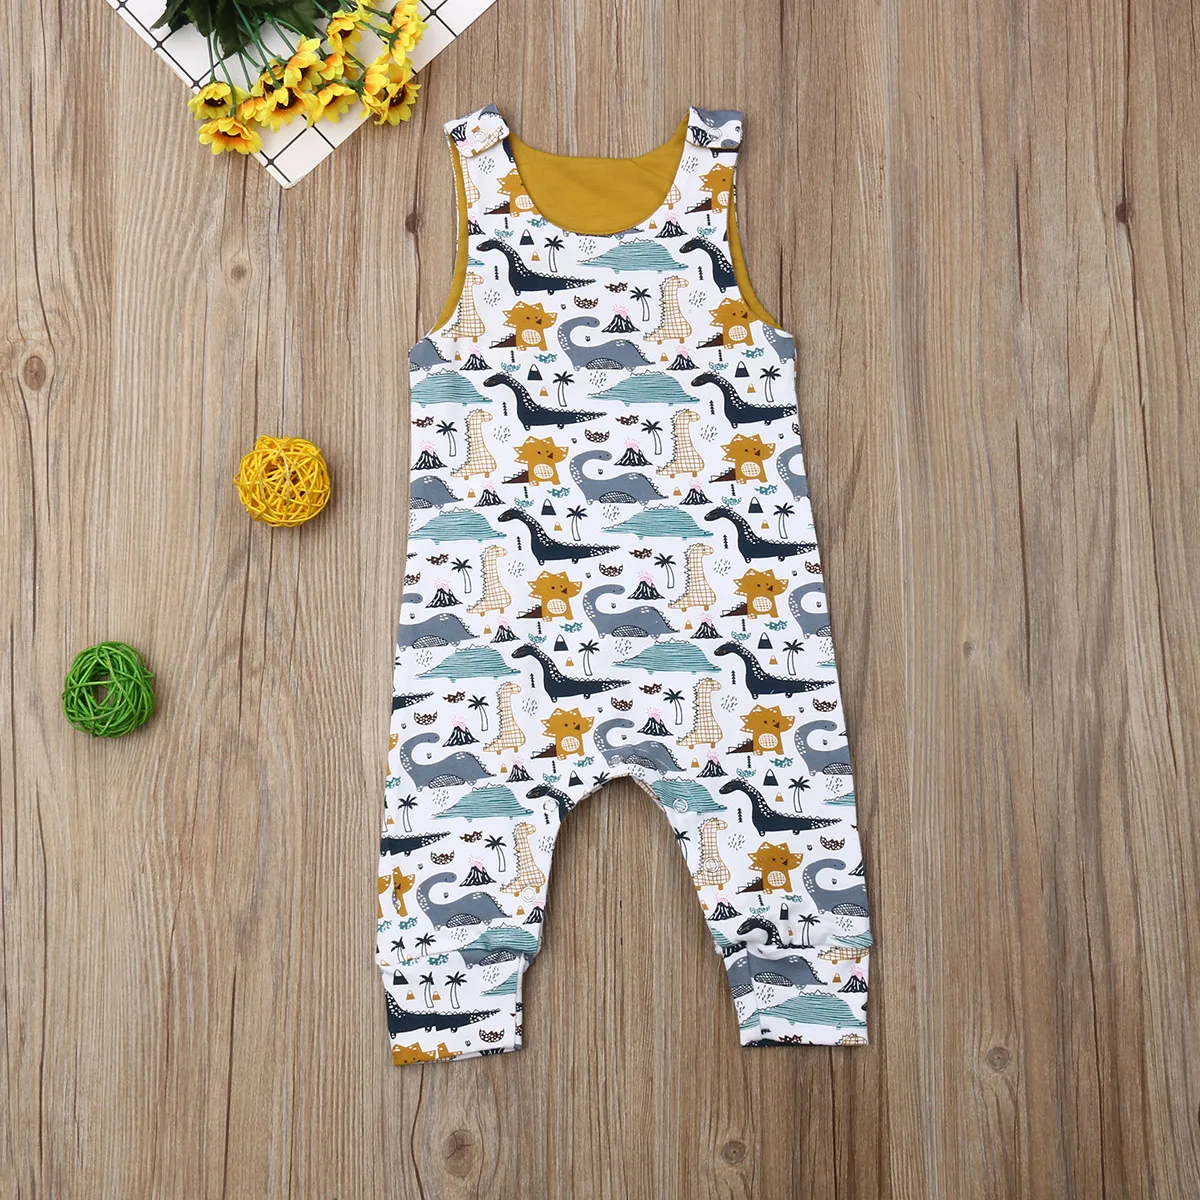 

Pudcoco Summer Newborn Baby Boy Girl Clothes Sleeveless Cotton Dinosaur Print Romper Jumpsuit One-Piece Outfit Playsuit 0-24M